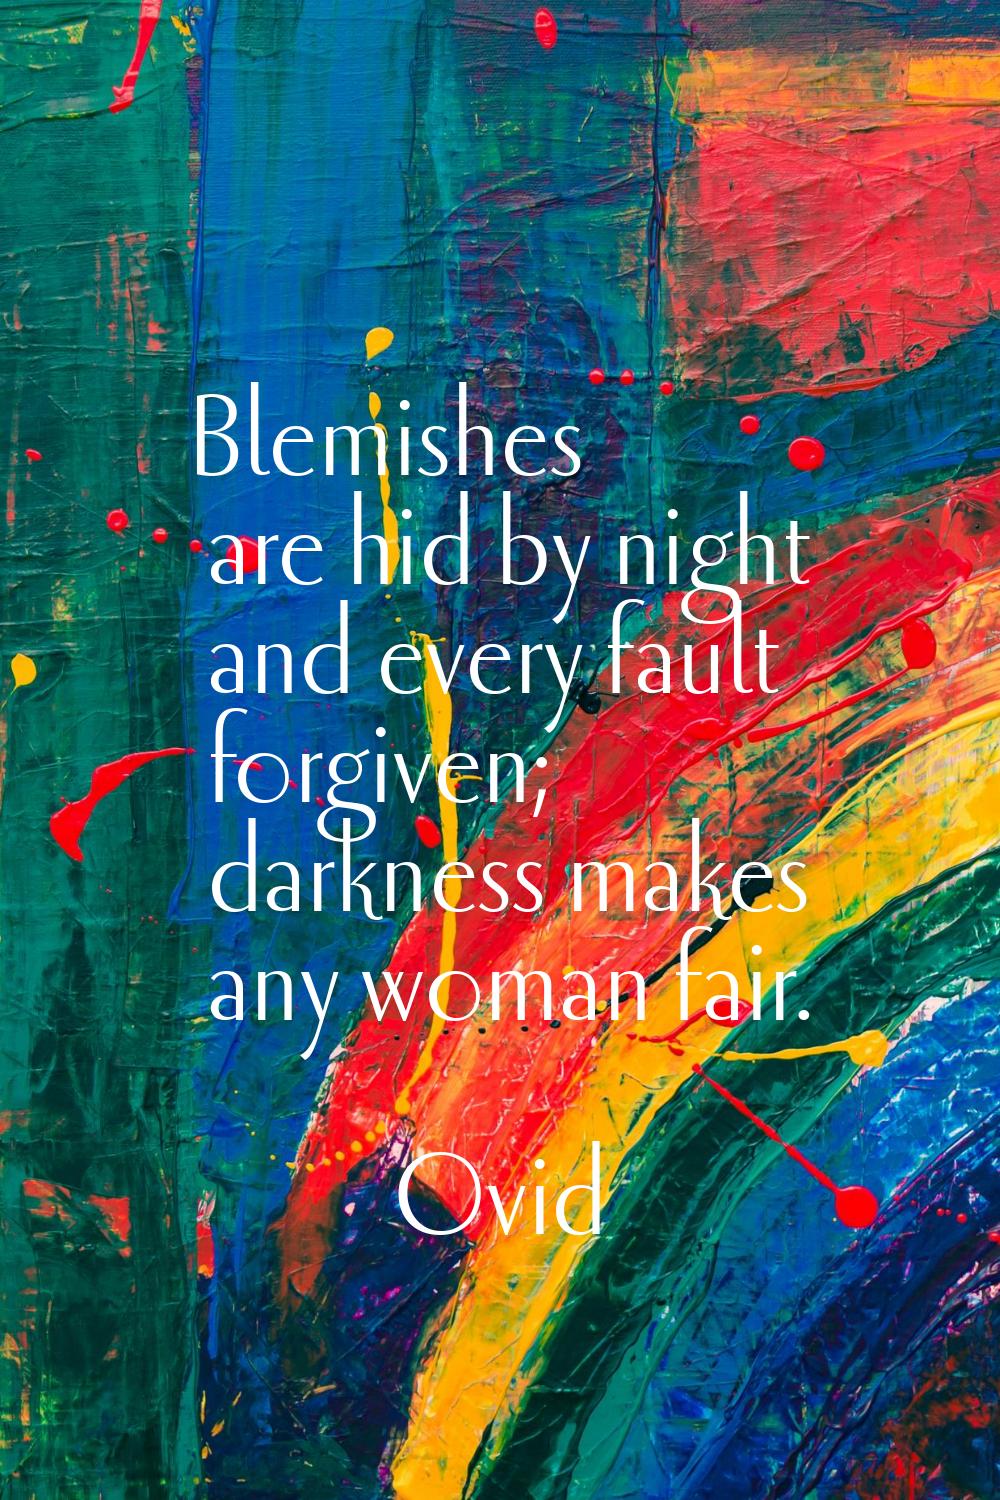 Blemishes are hid by night and every fault forgiven; darkness makes any woman fair.